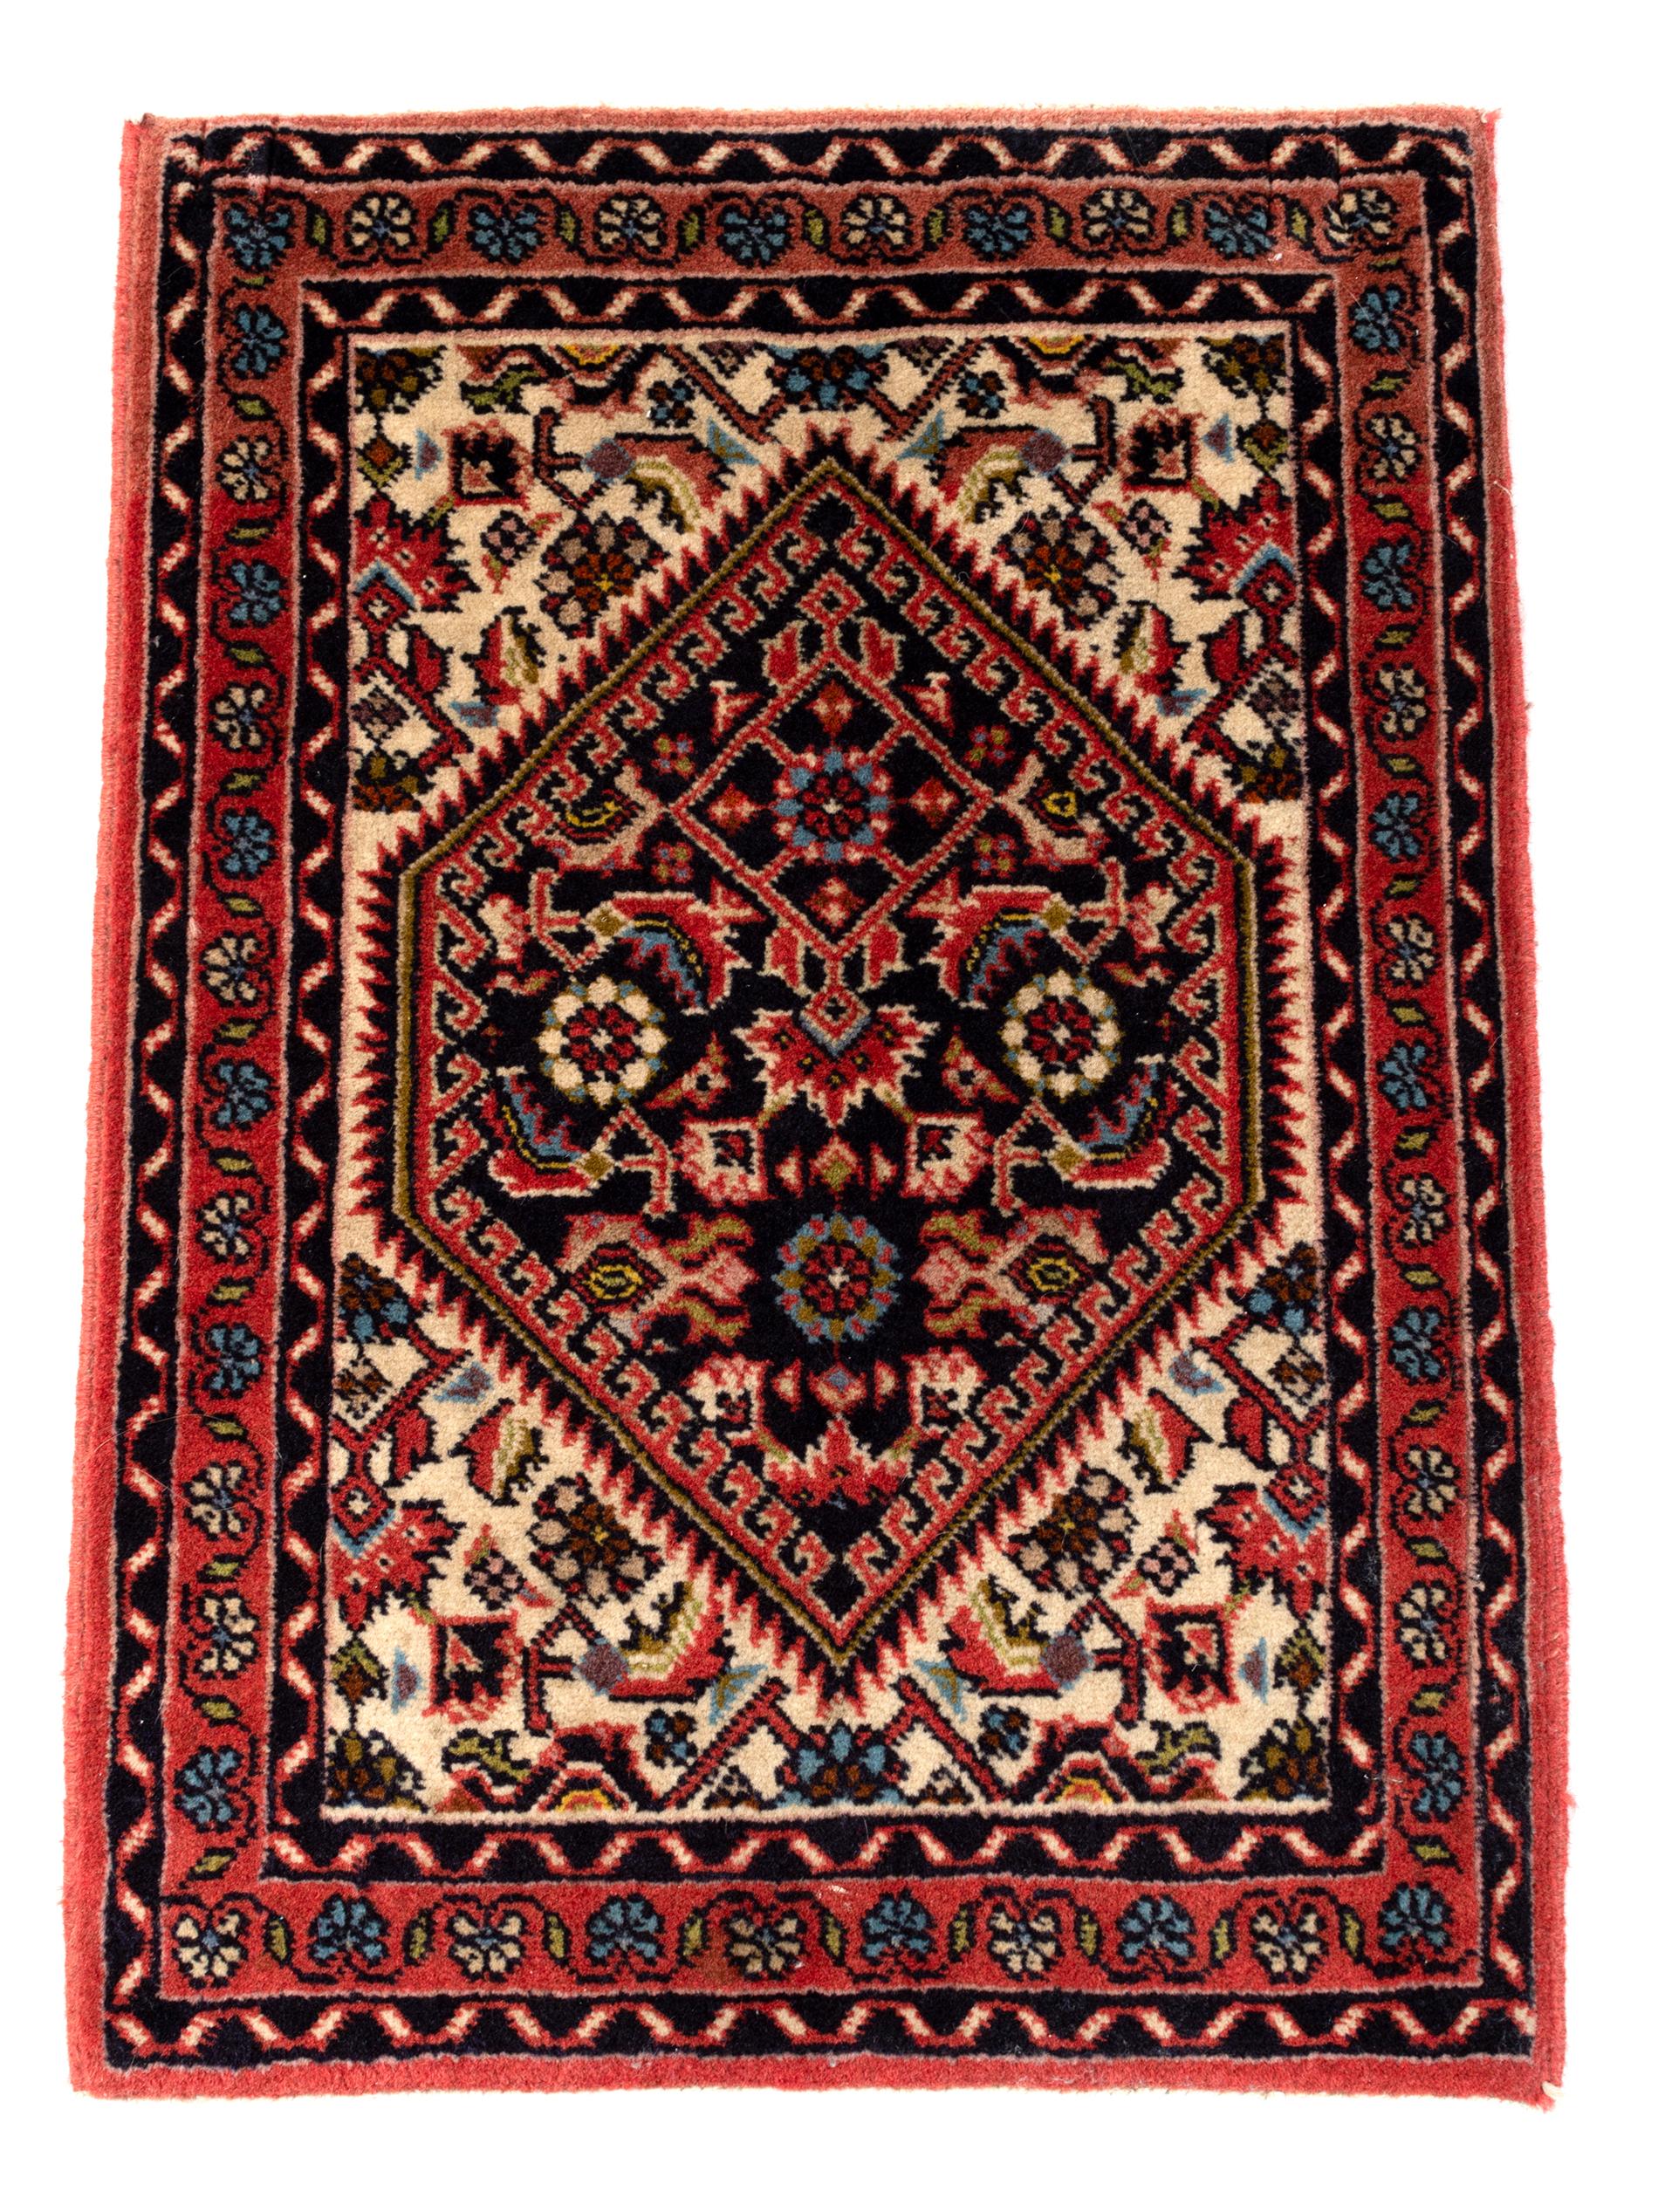 Persian Qashqai prayer mat rug. Ideal for a hallway, front door or beside a bed.
Hand-knotted
Wool on cotton foundation
Central Medallion

Measures: 44 x 60.5cm

Excellent condition.